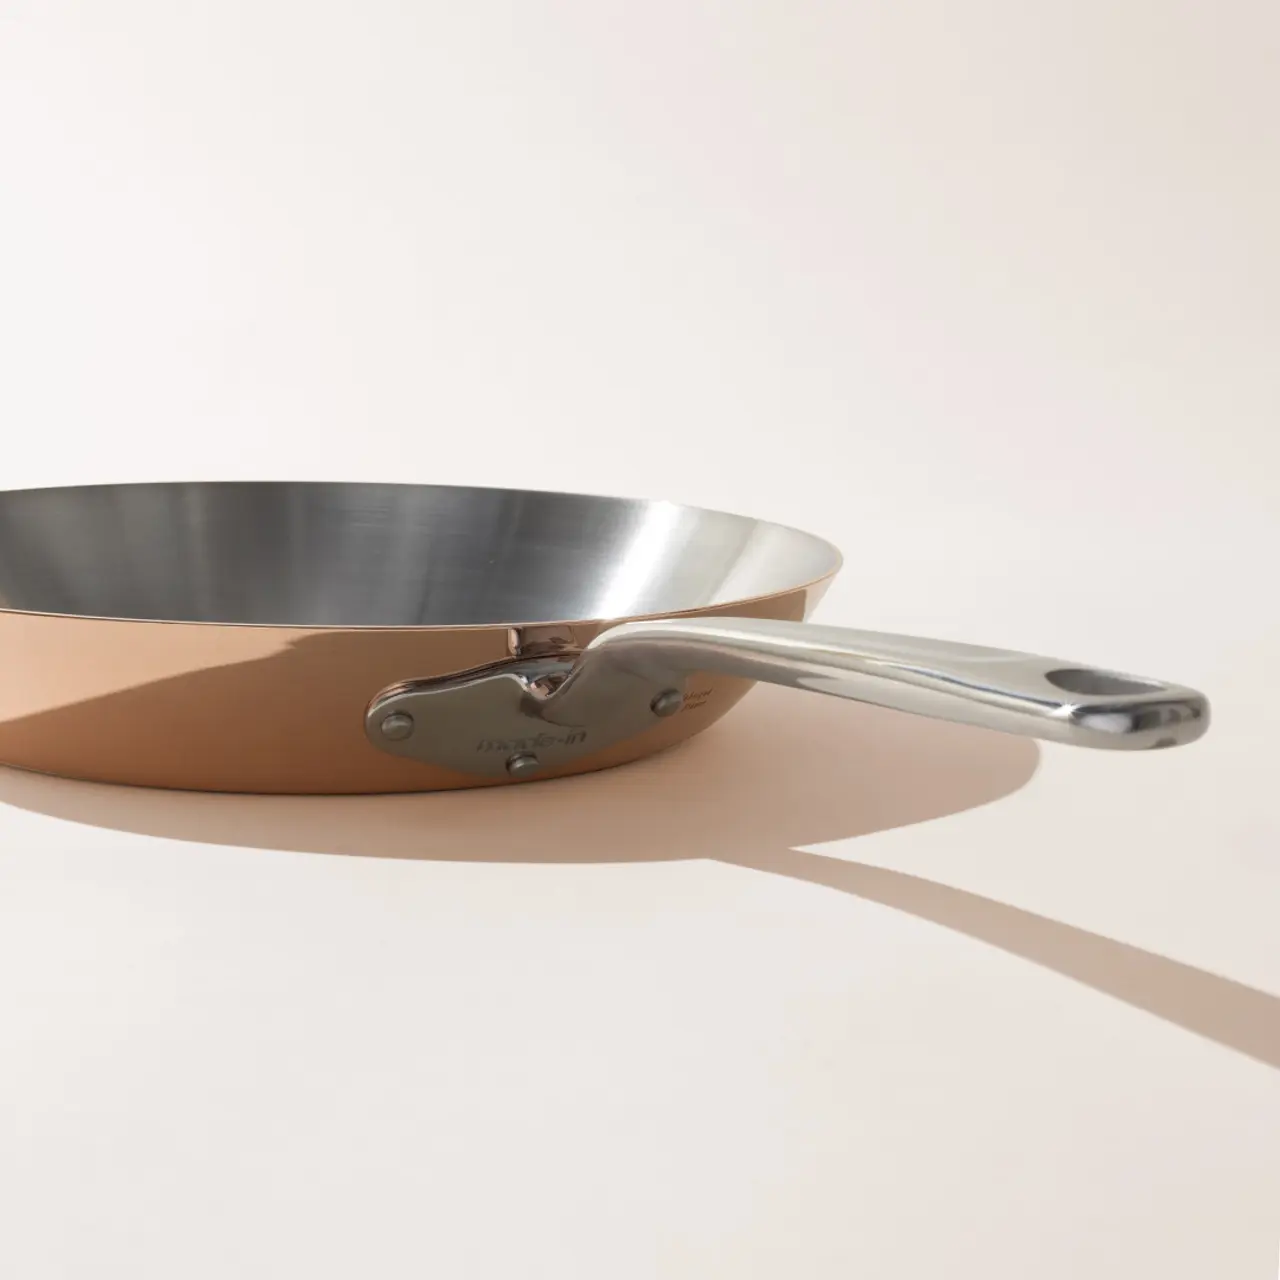 A stainless steel frying pan with a long handle casts a shadow on a light-colored surface.